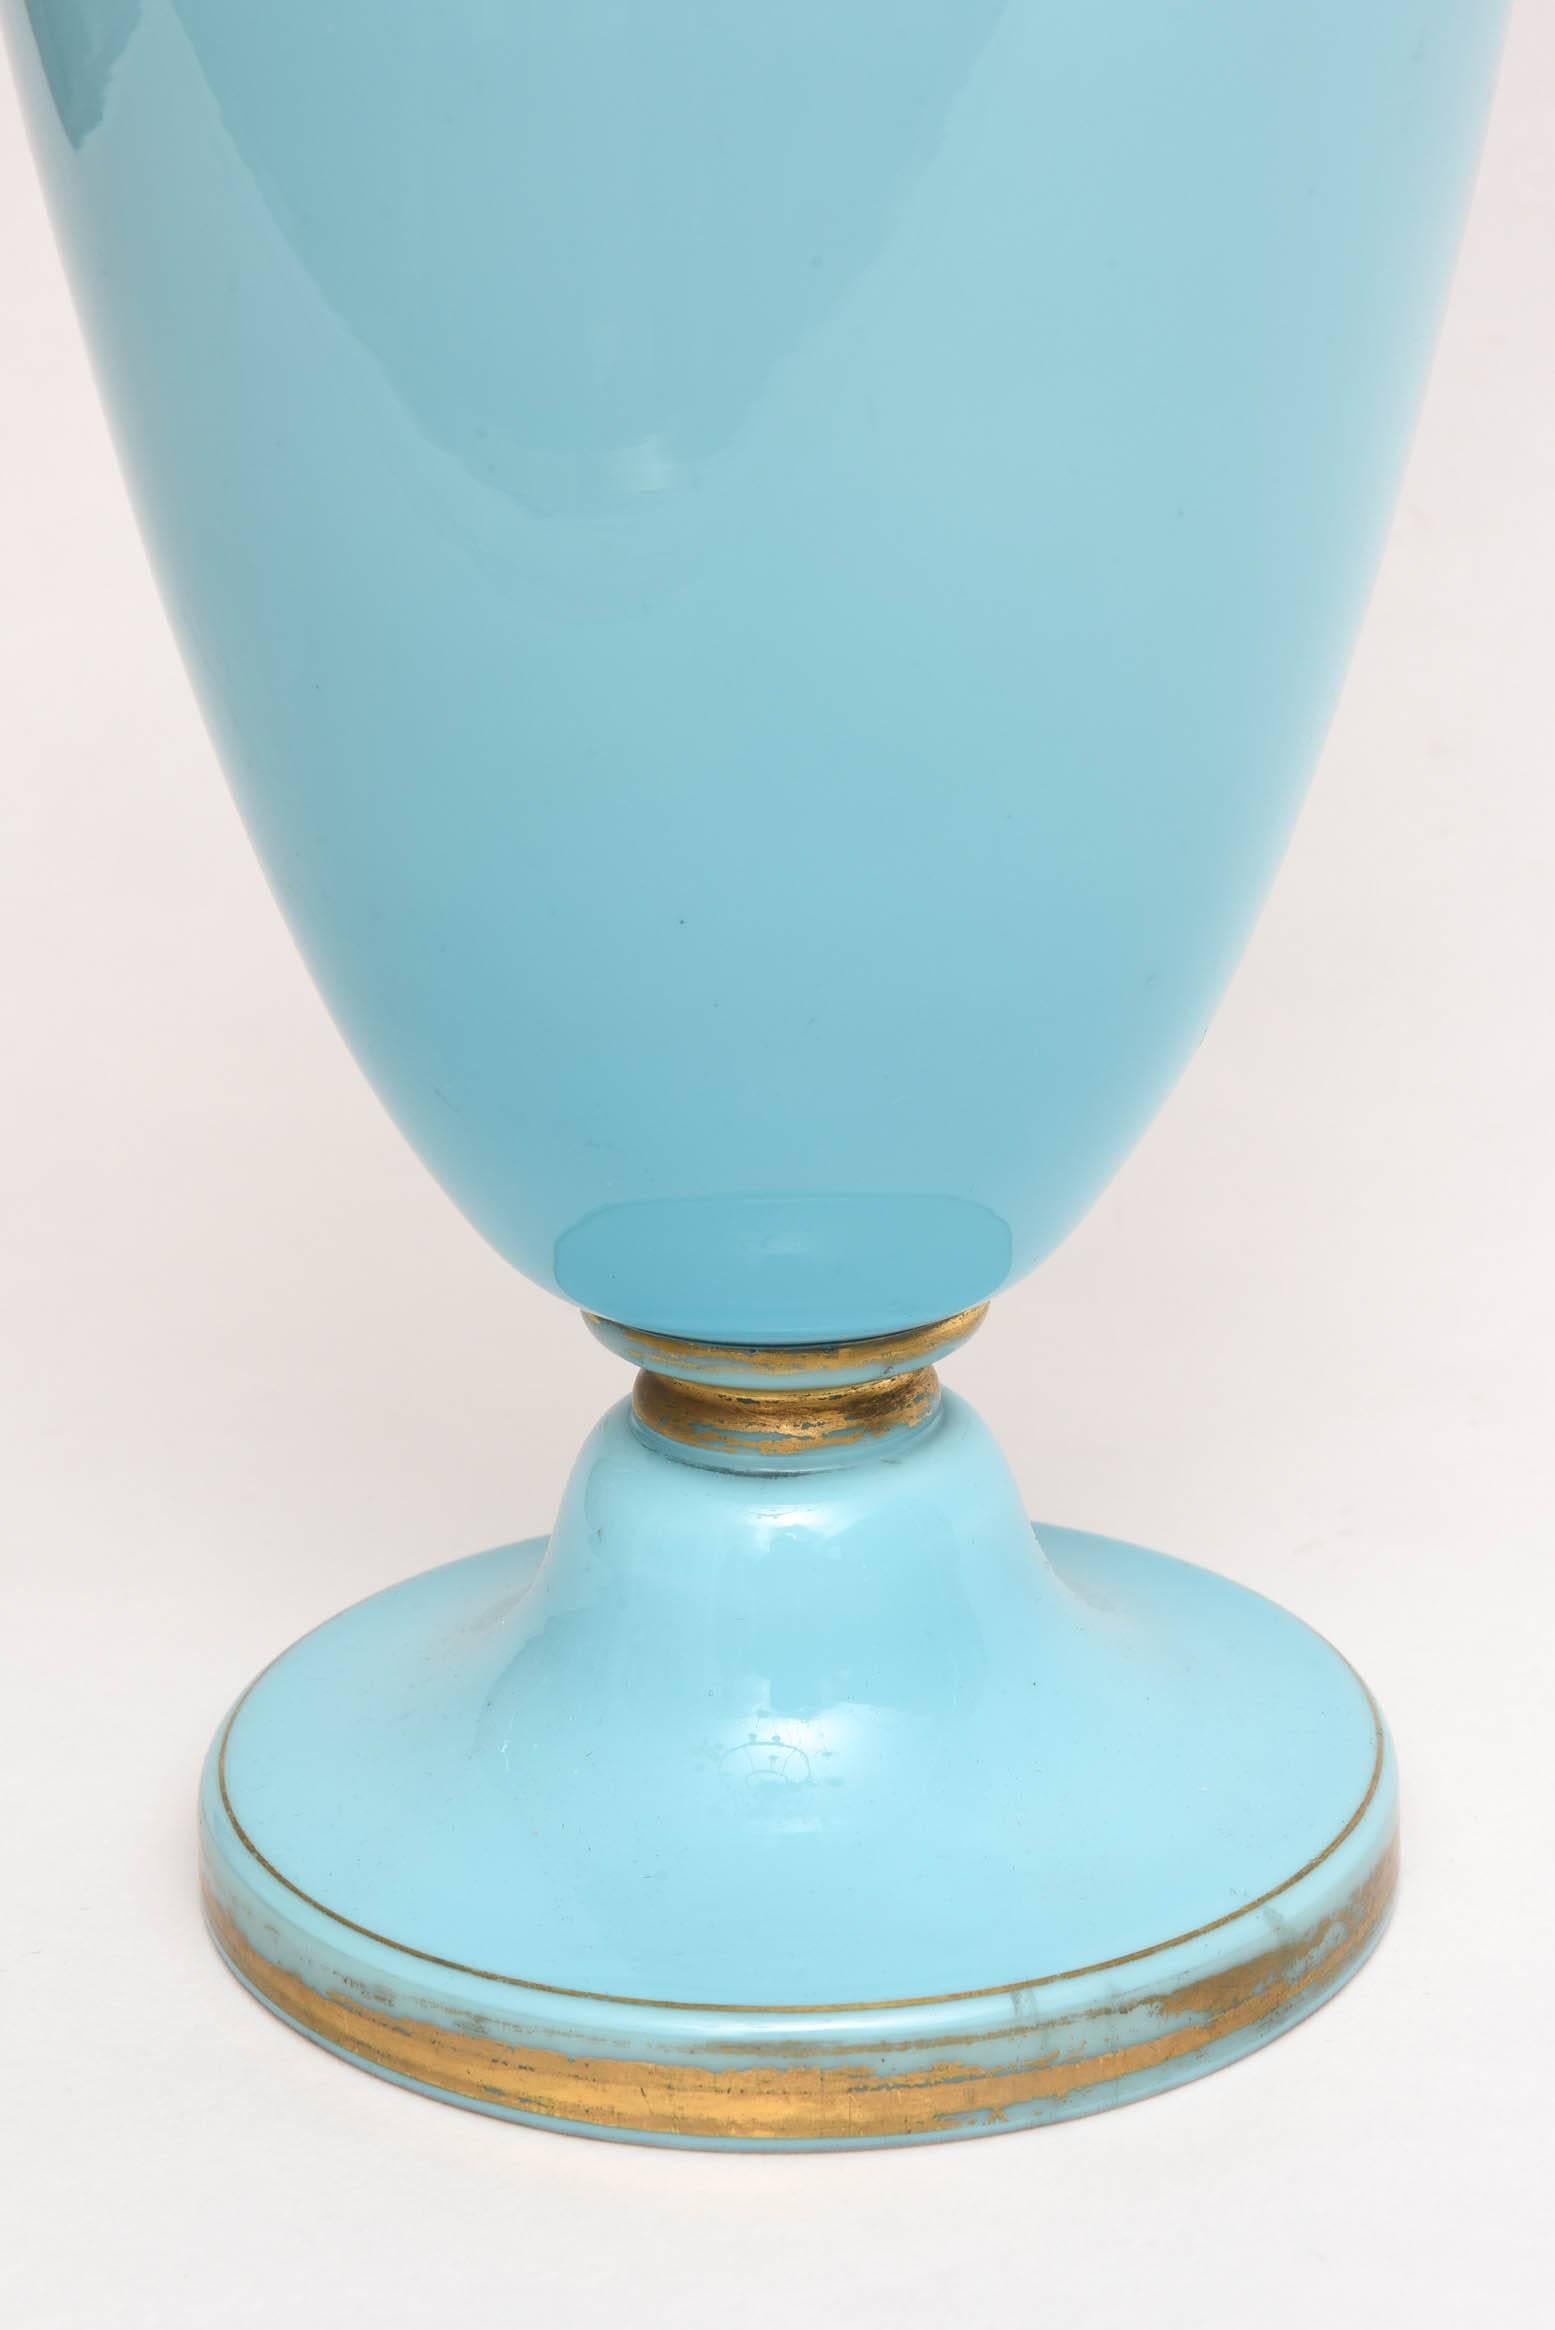 19th Century Tall Opaline Glass Vase with Hand-Painted Florals, Attributed to Baccarat